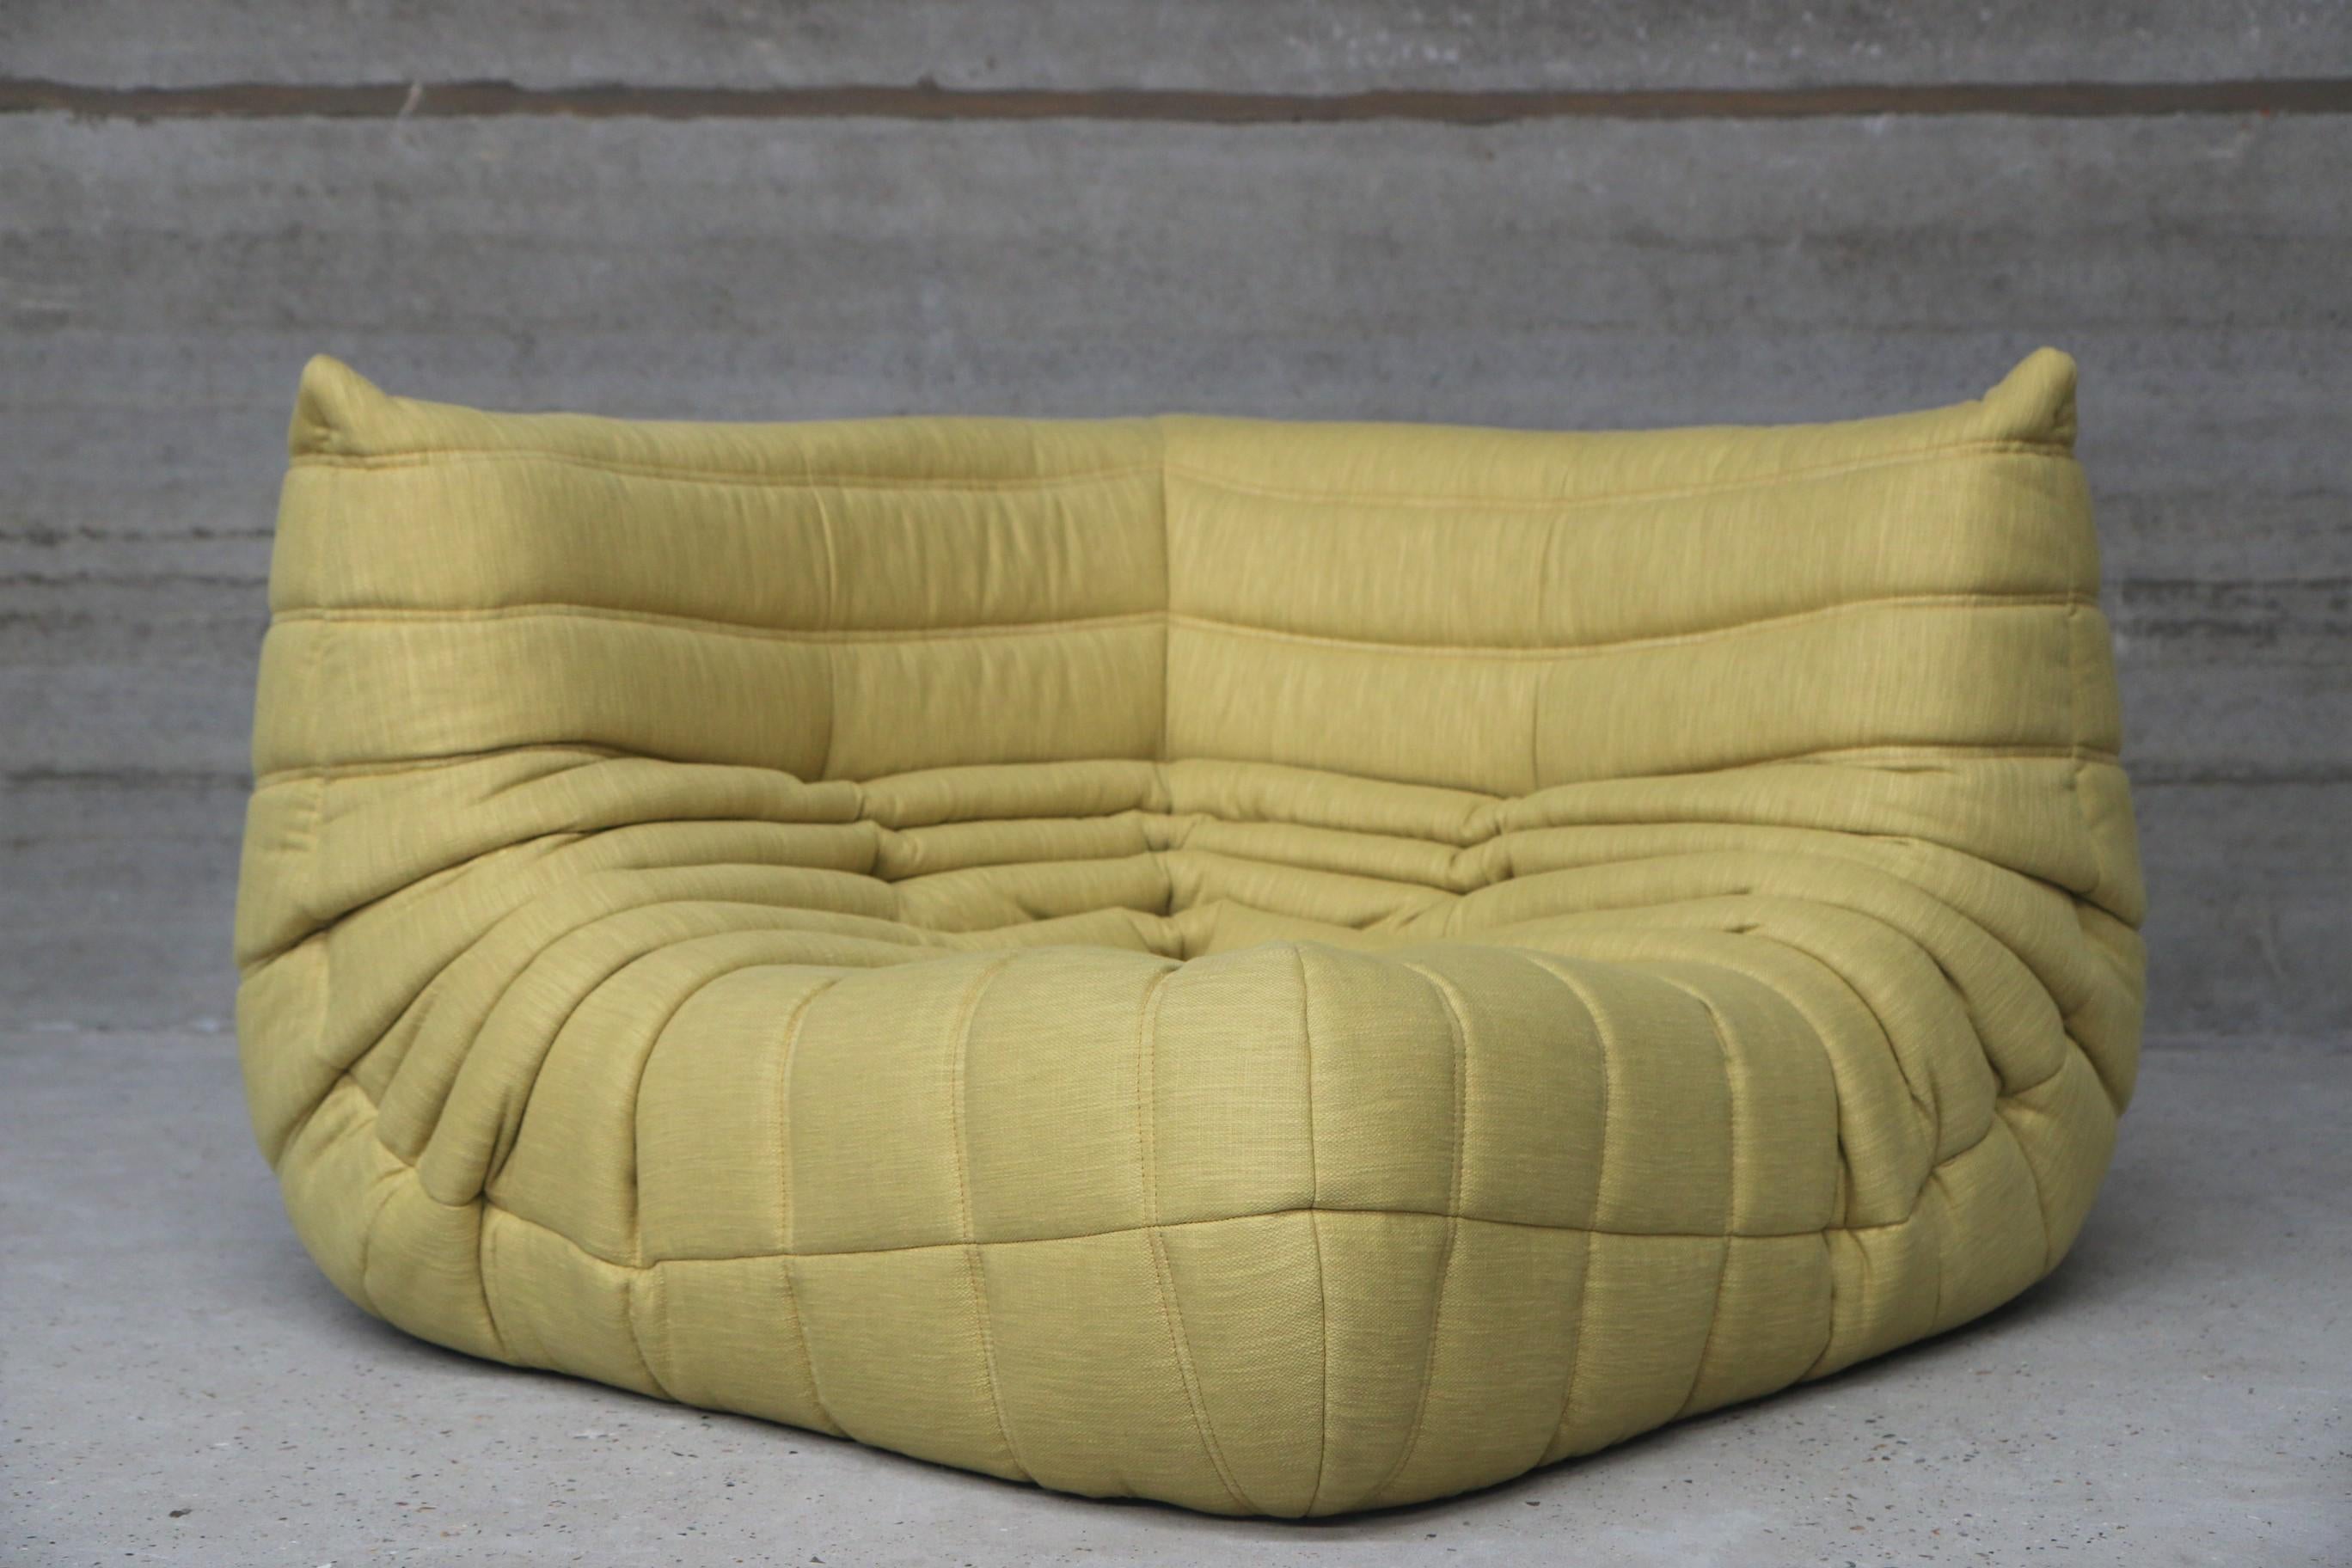 Iconic French vintage corner seat, beautifully reupholstered in our brand new, stain free, washable and very durable Cordoba Chartreuse fabric.
Original genuine vintage 